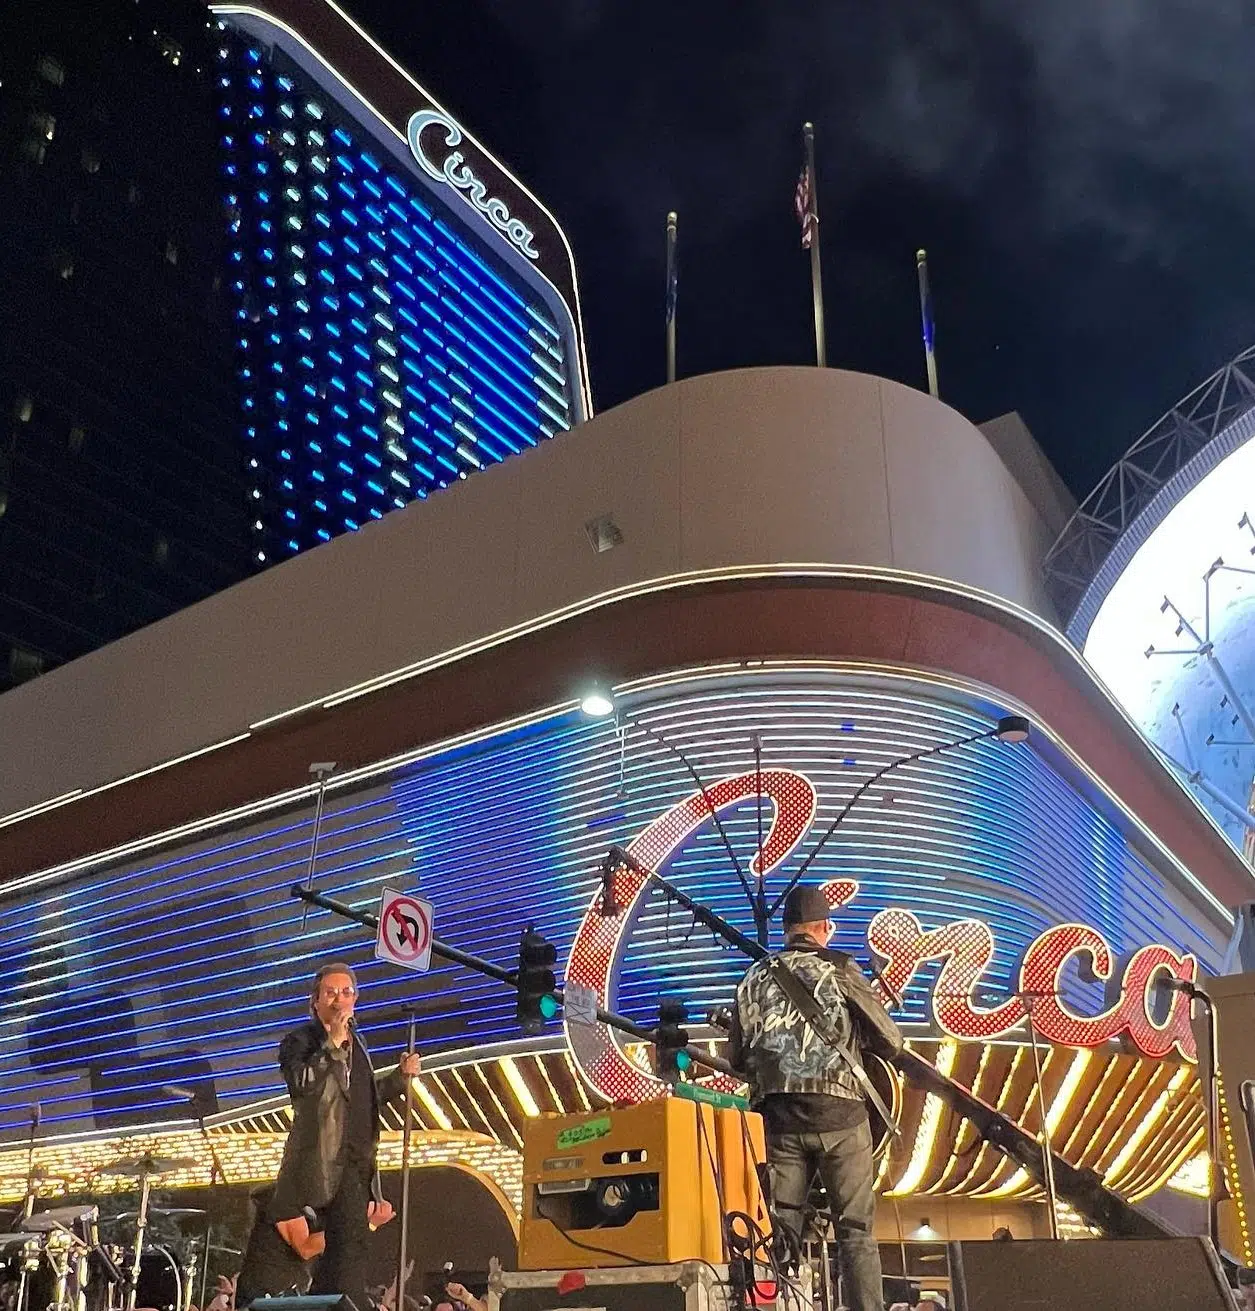 U2 Shoots Video for 'Atomic City' in Las Vegas With Larry Mullen Jr.